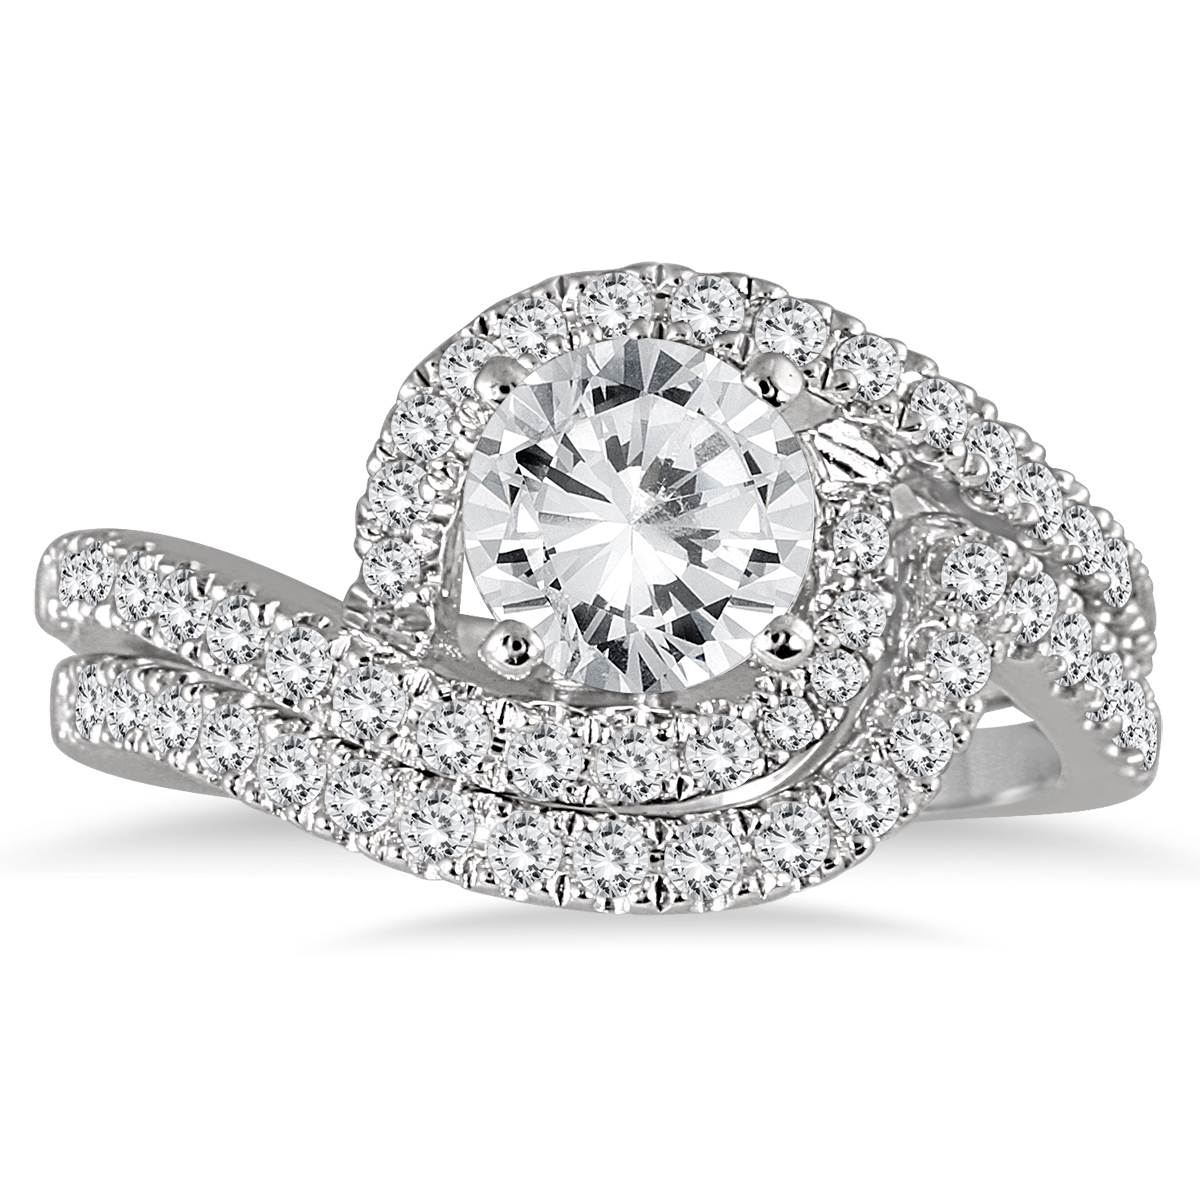 Image of AGS Certified 1 1/2 Carat TW Curved Diamond Bridal Set in 14K White Gold (I-J Color I2-I3 Clarity)